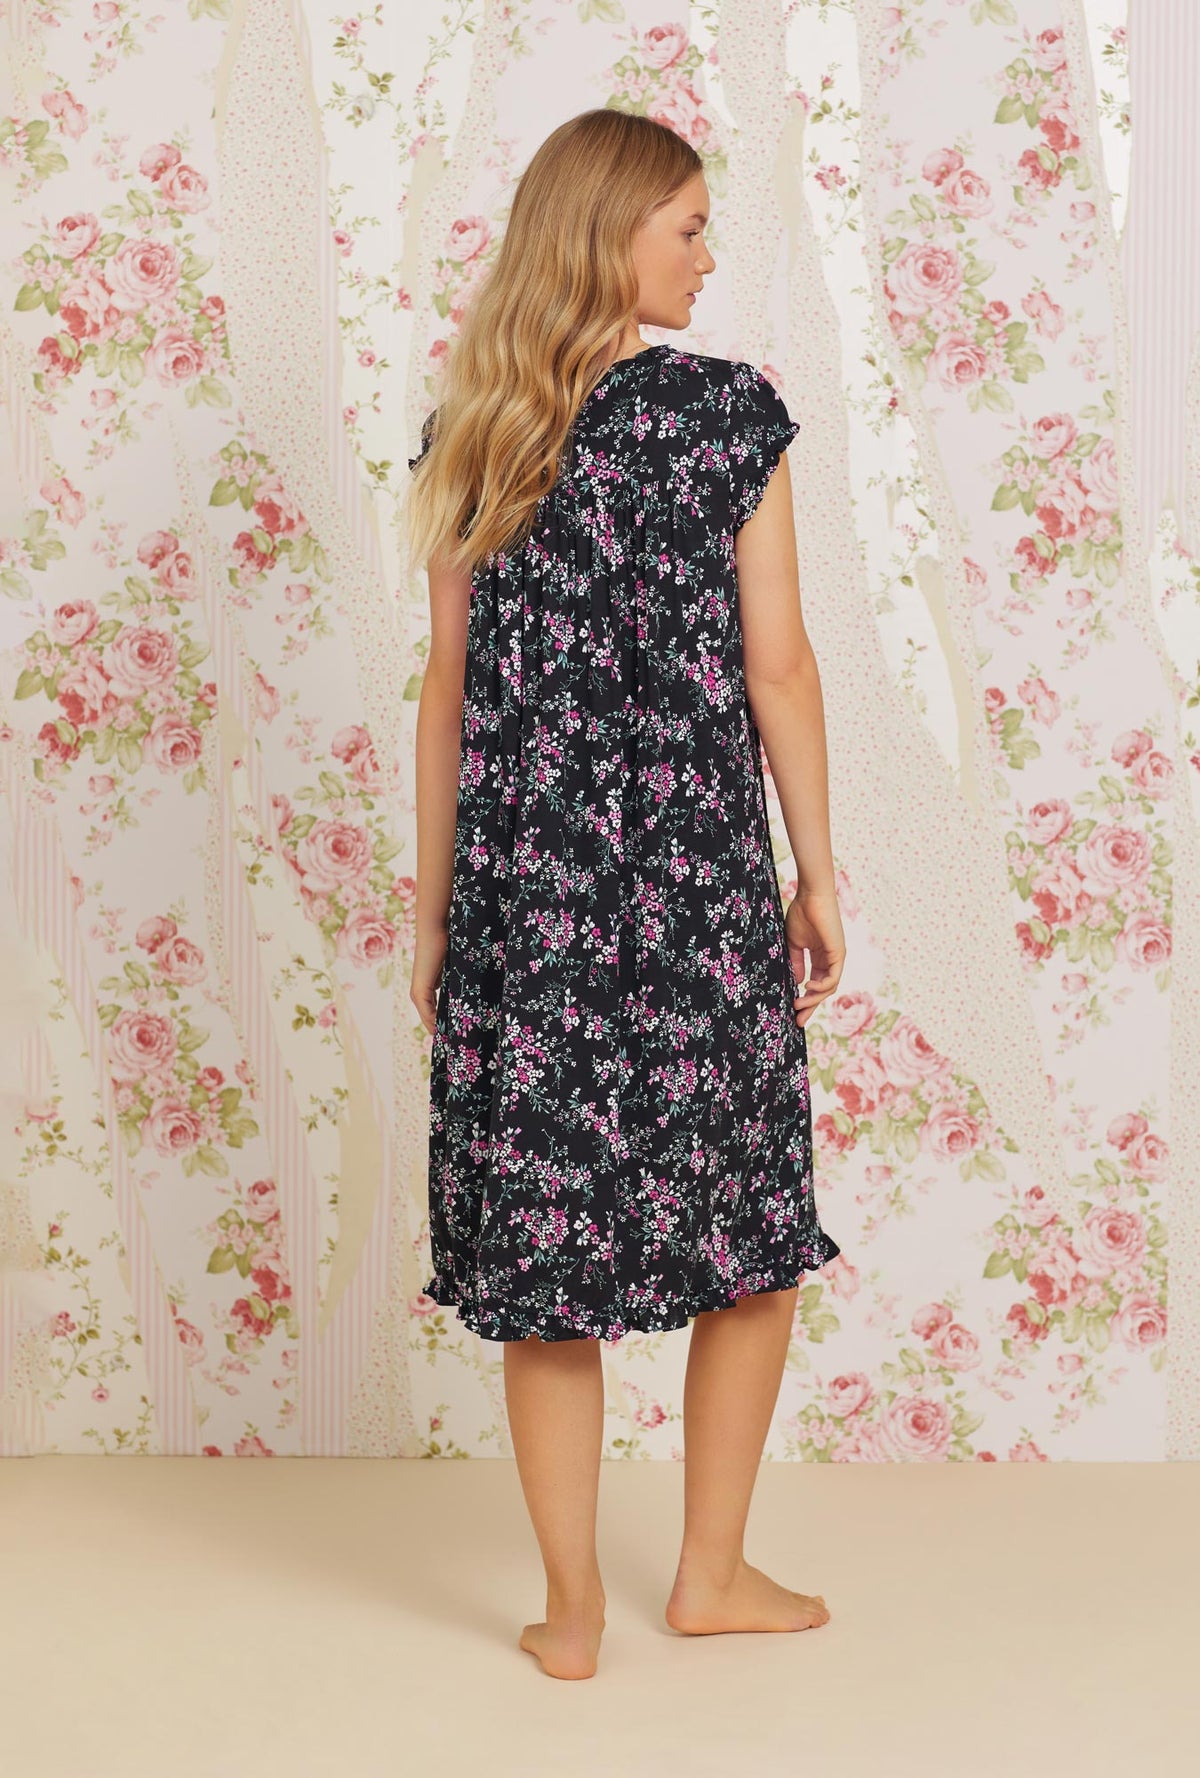 A lady wearing black cap sleeve tencel waltz knit nightgown with valentine floral print.